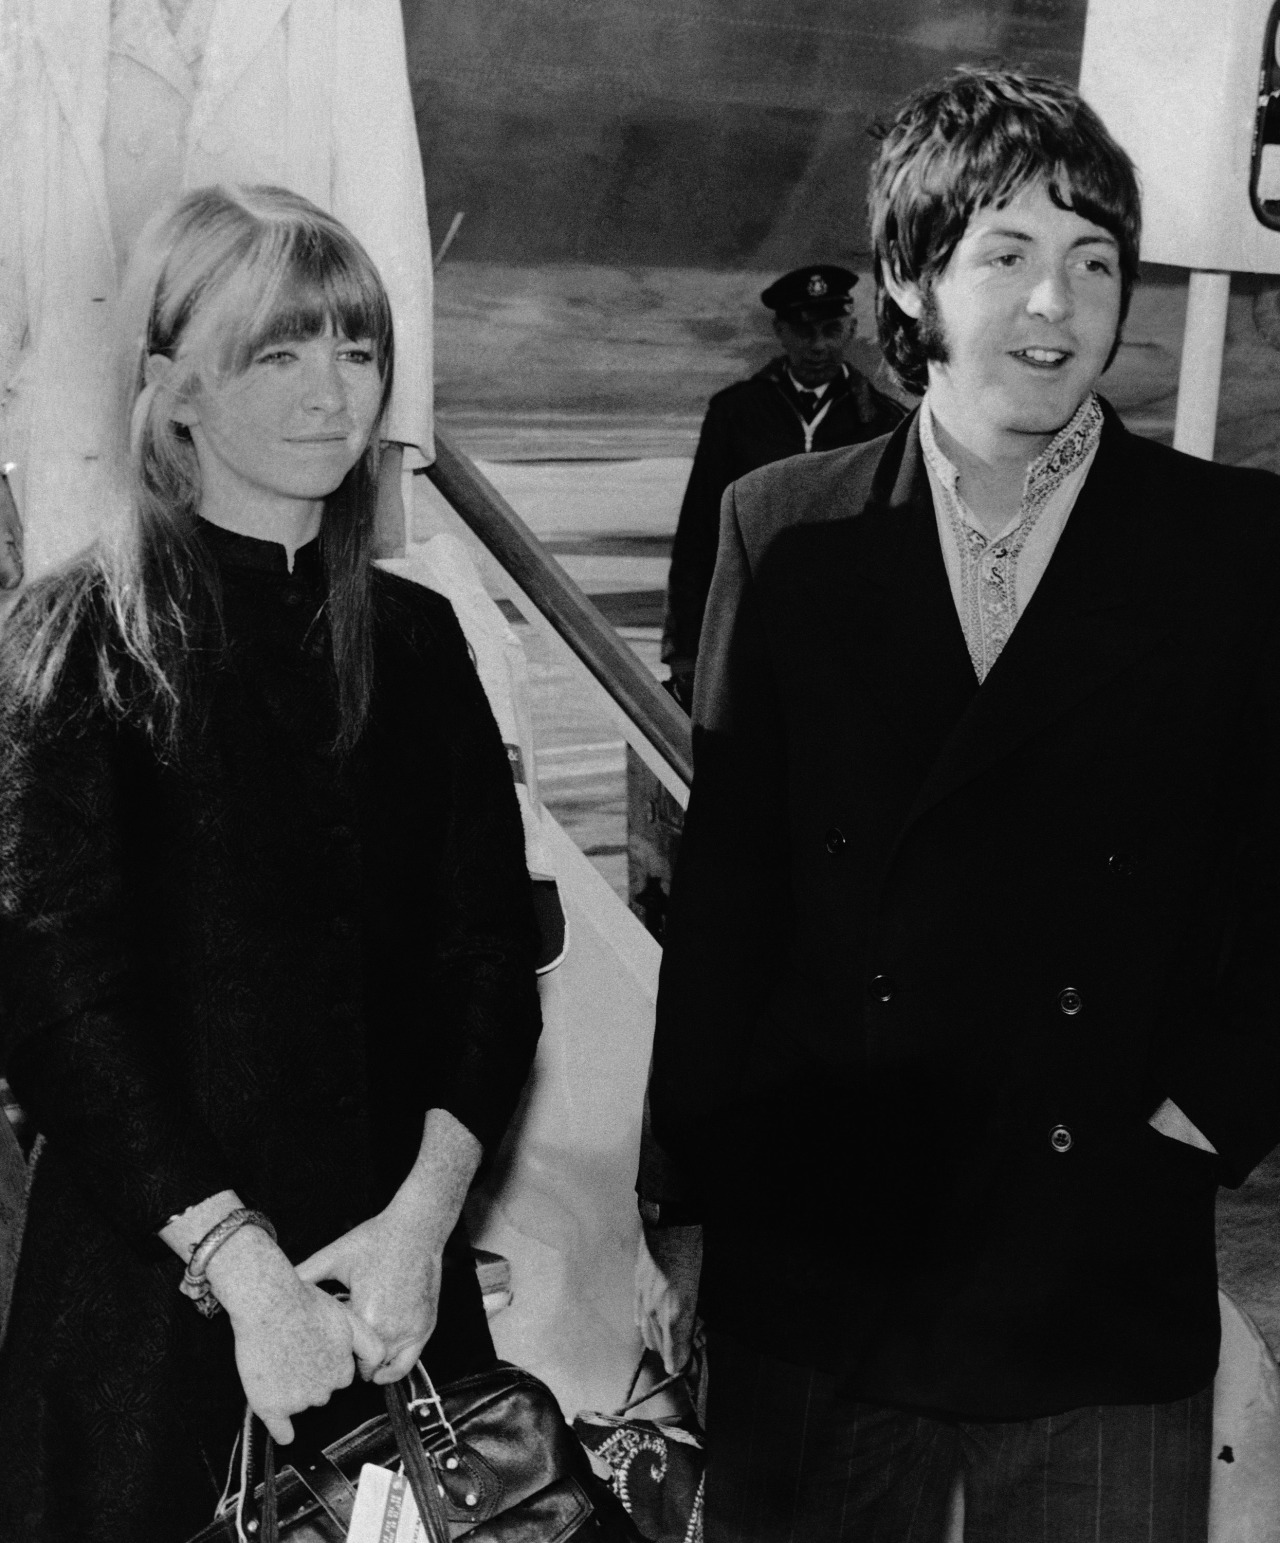 No cage to make her stay, meetthebeatles: Paul Mccartney & Jane Asher